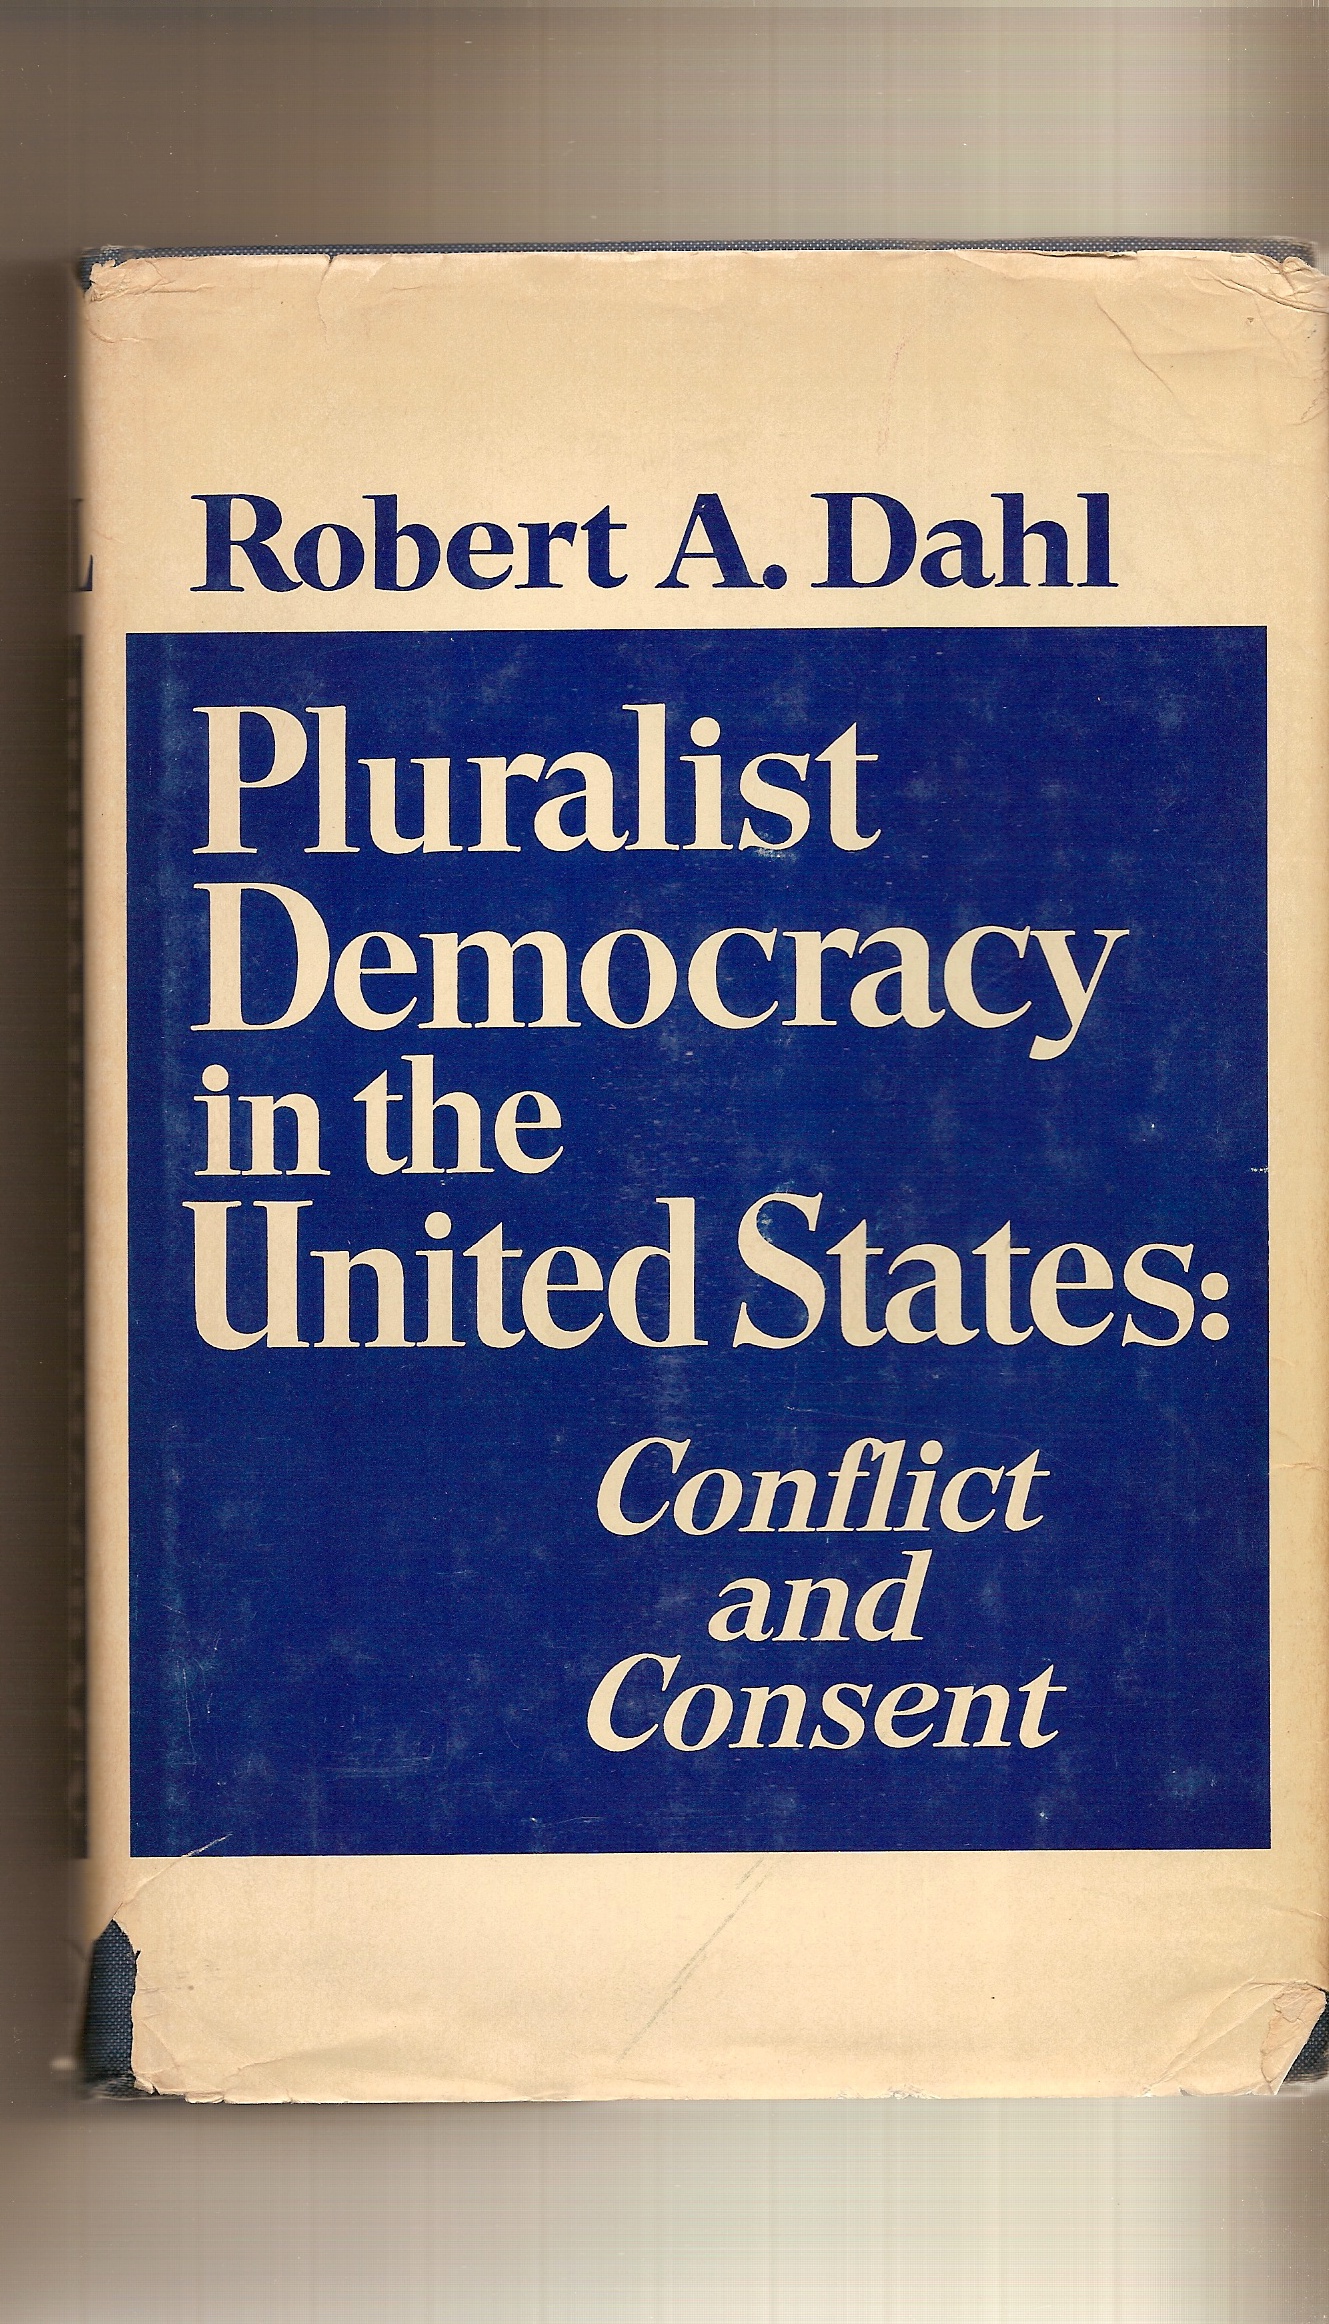 DAHL ROBERT A. - Pluralist Democracy in the United States Conflict and Consent